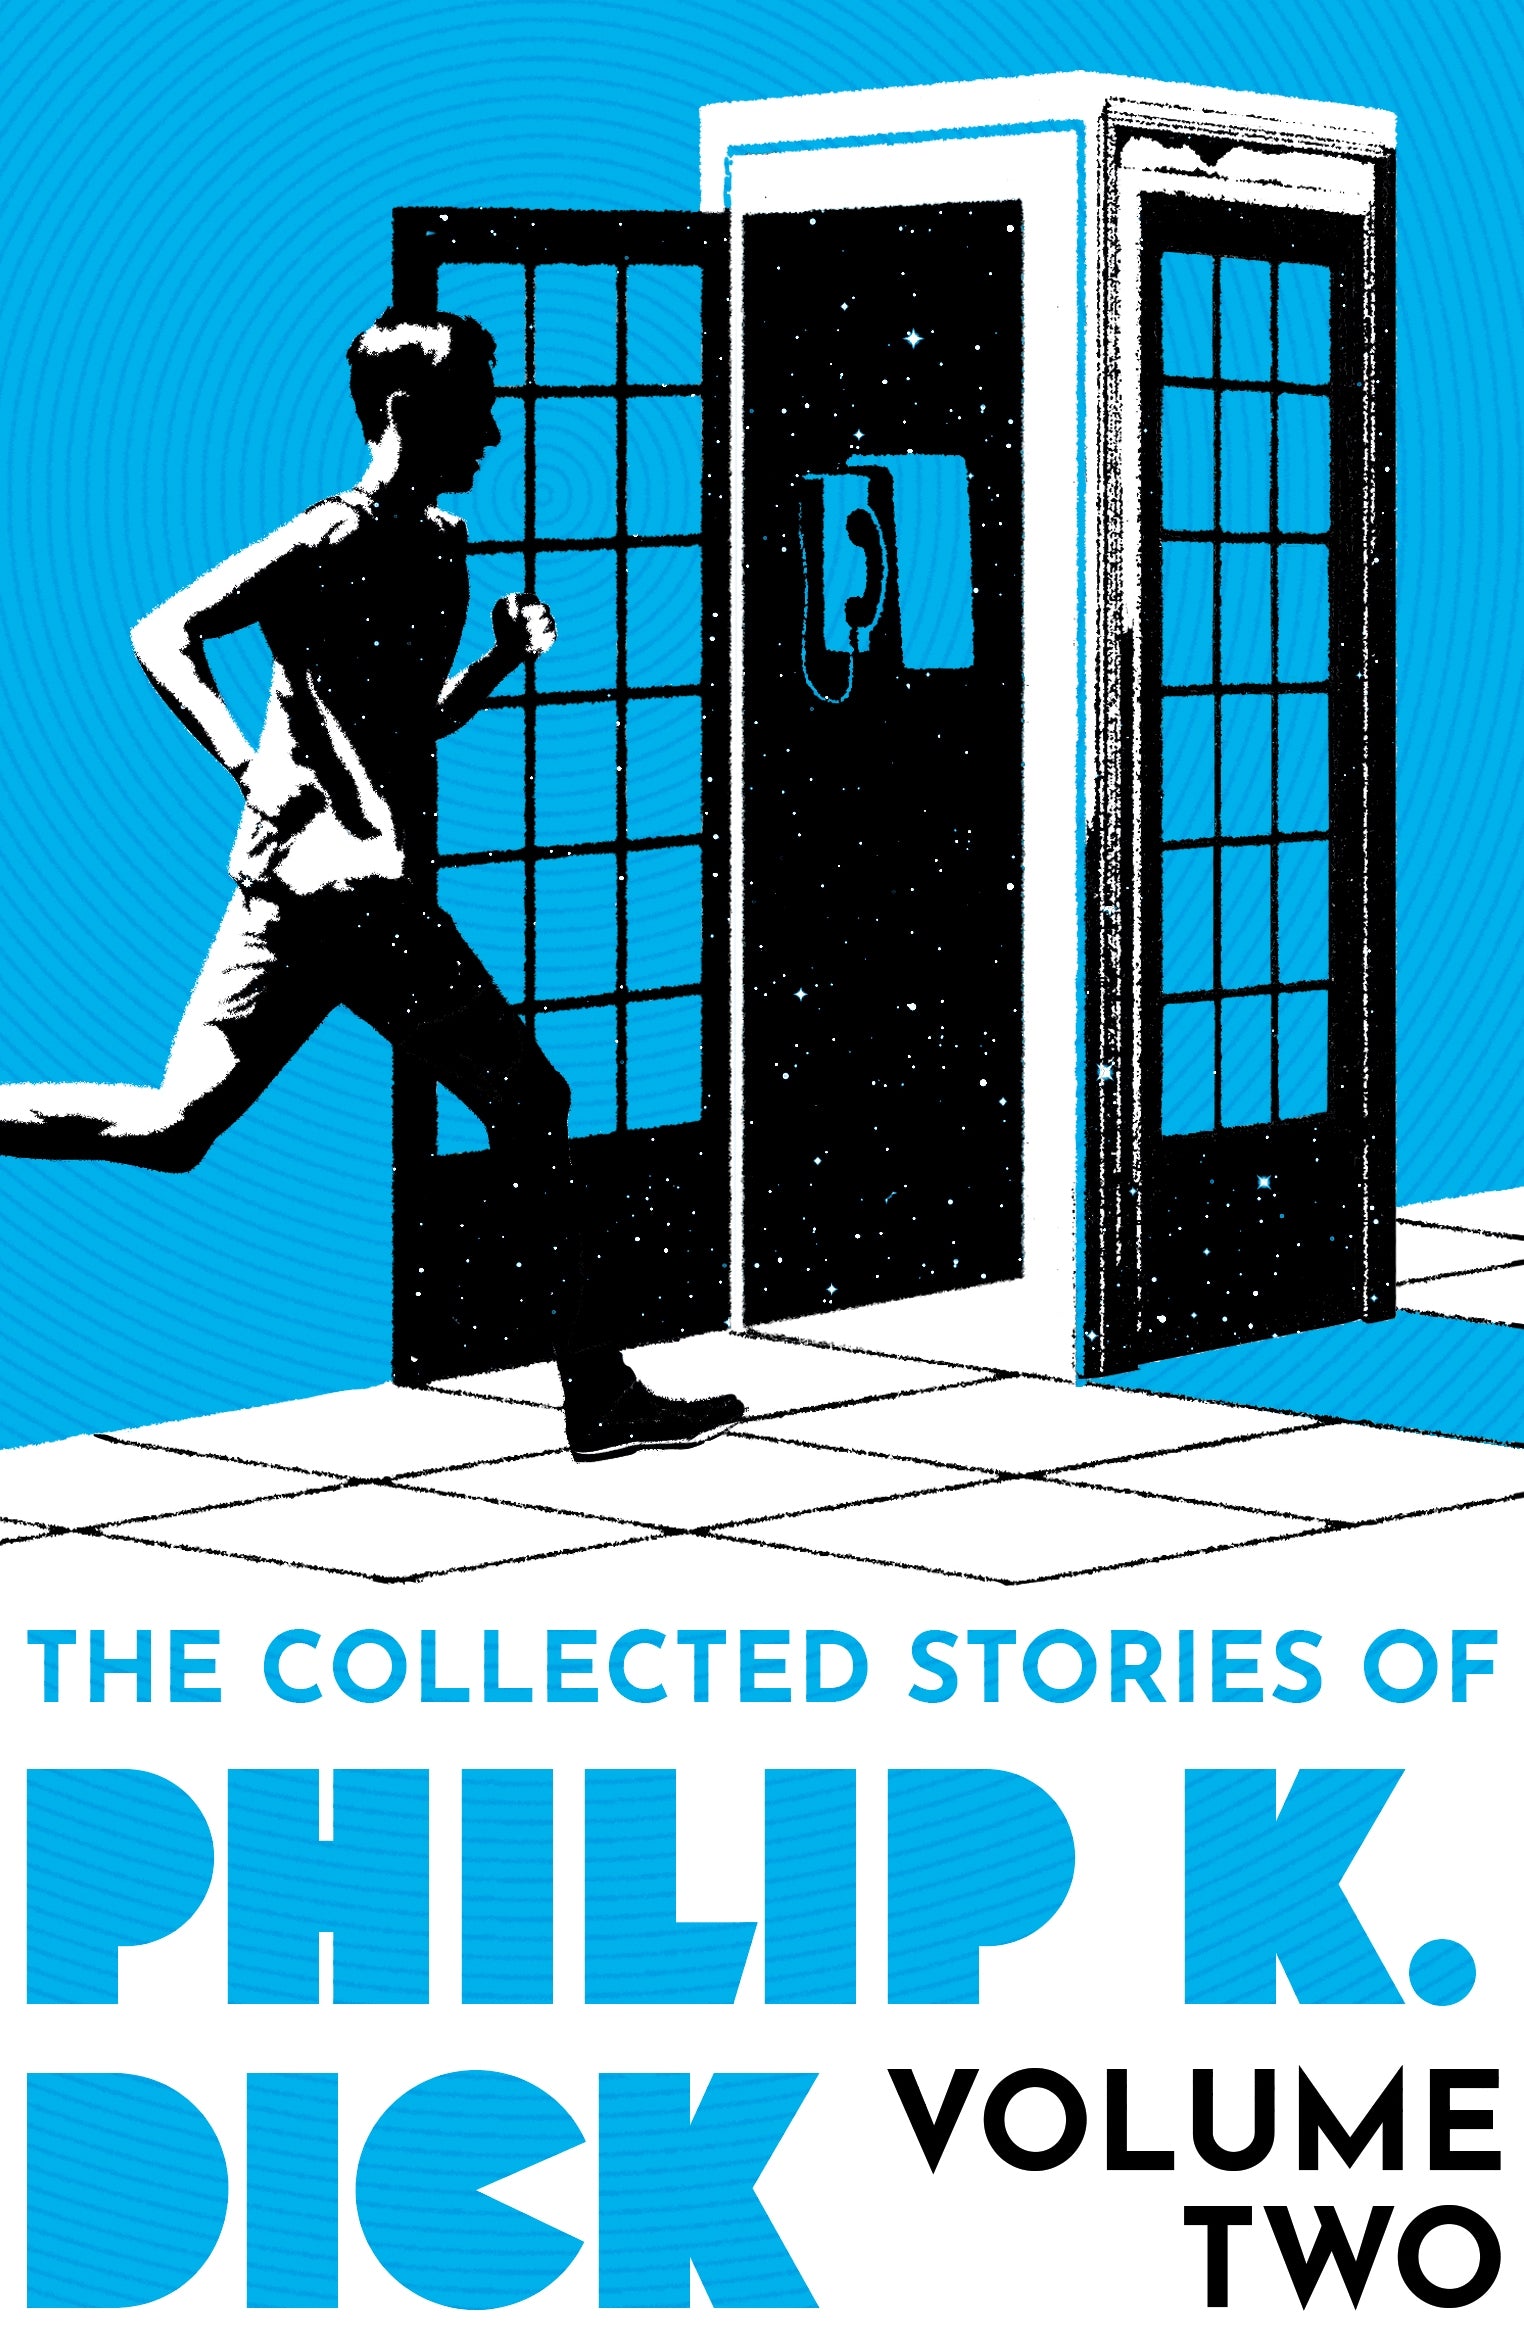 The Collected Stories of Philip K. Dick Volume 2 by Philip K Dick